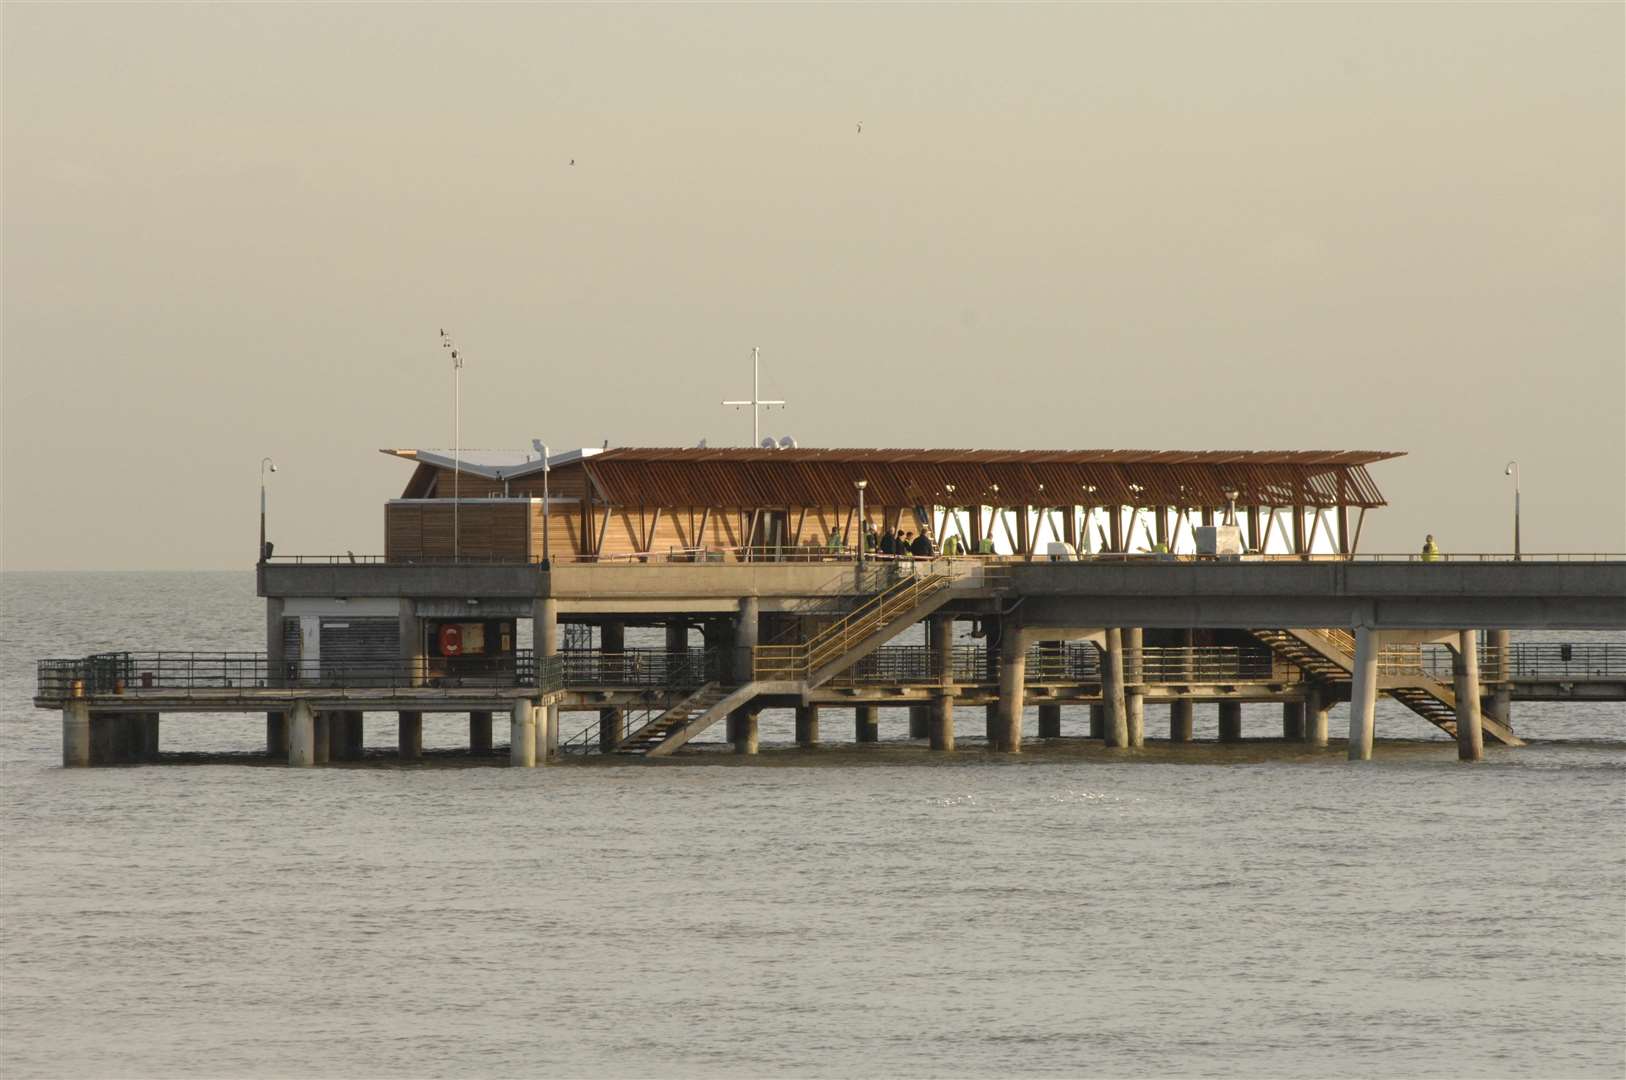 The café on Deal Pier is set to reopen as Deal Pier Kitchen